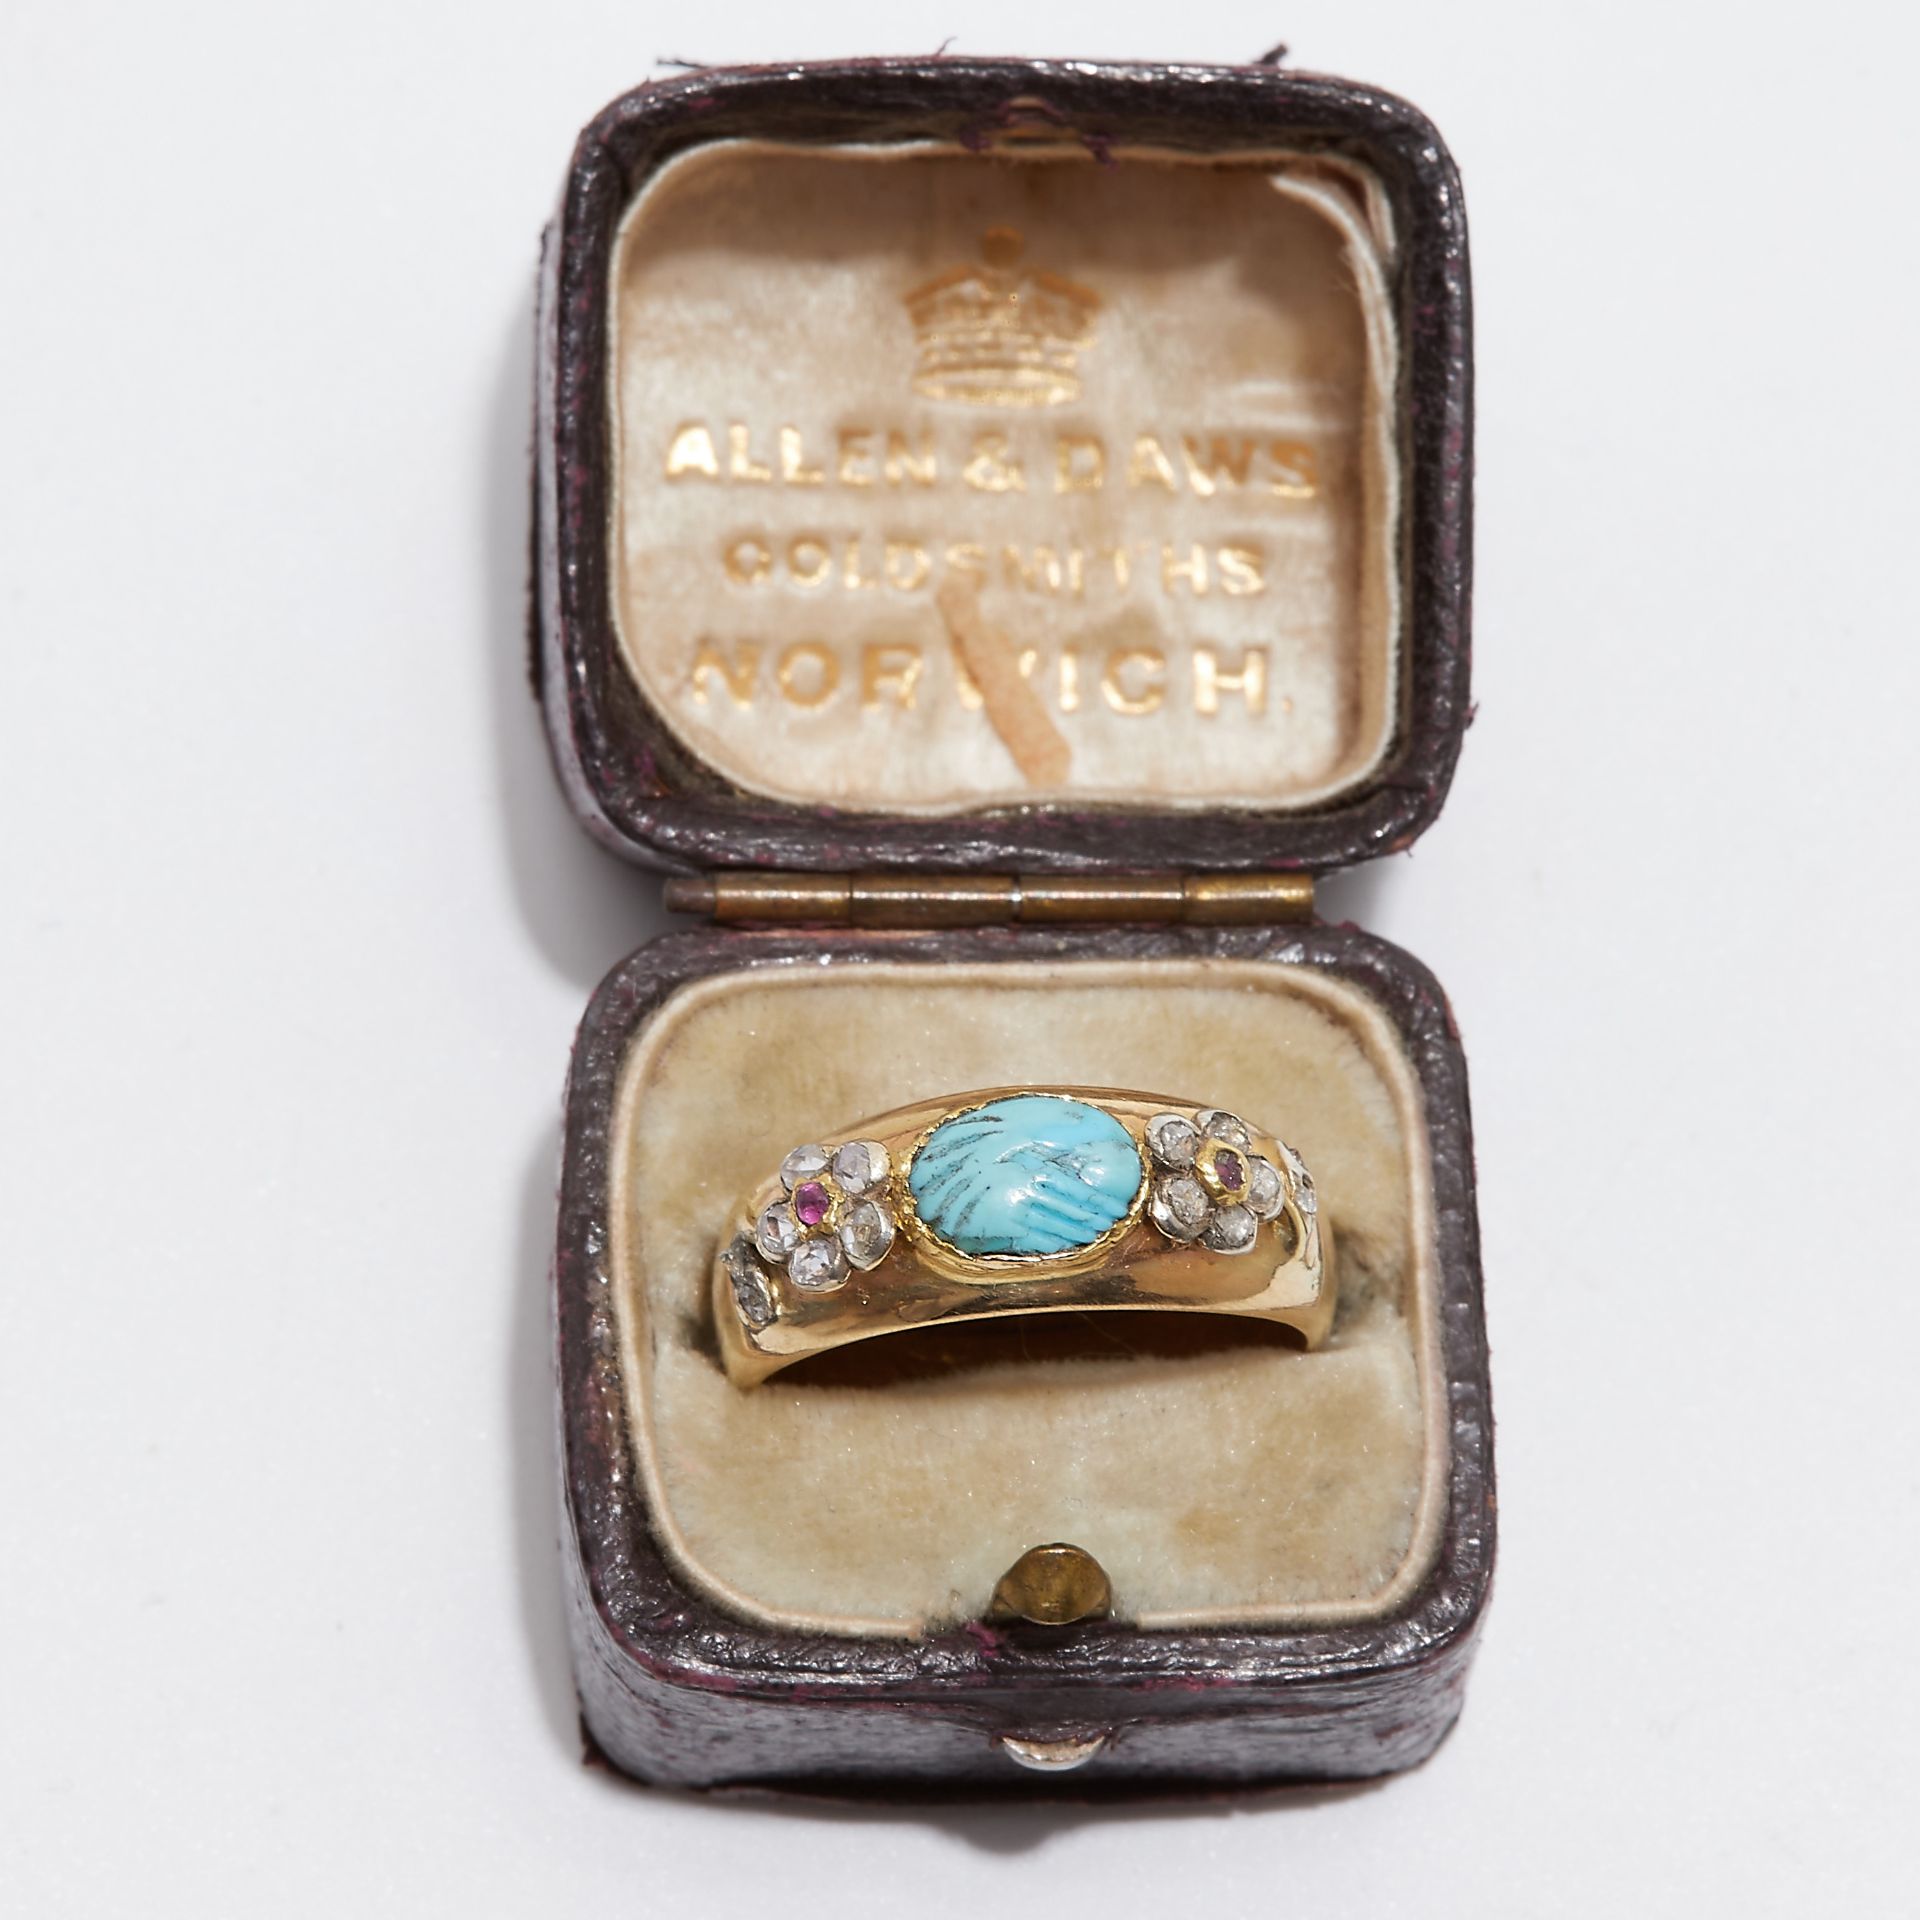 ANTIQUE TURQUOISE MOURNING RING - Image 2 of 2